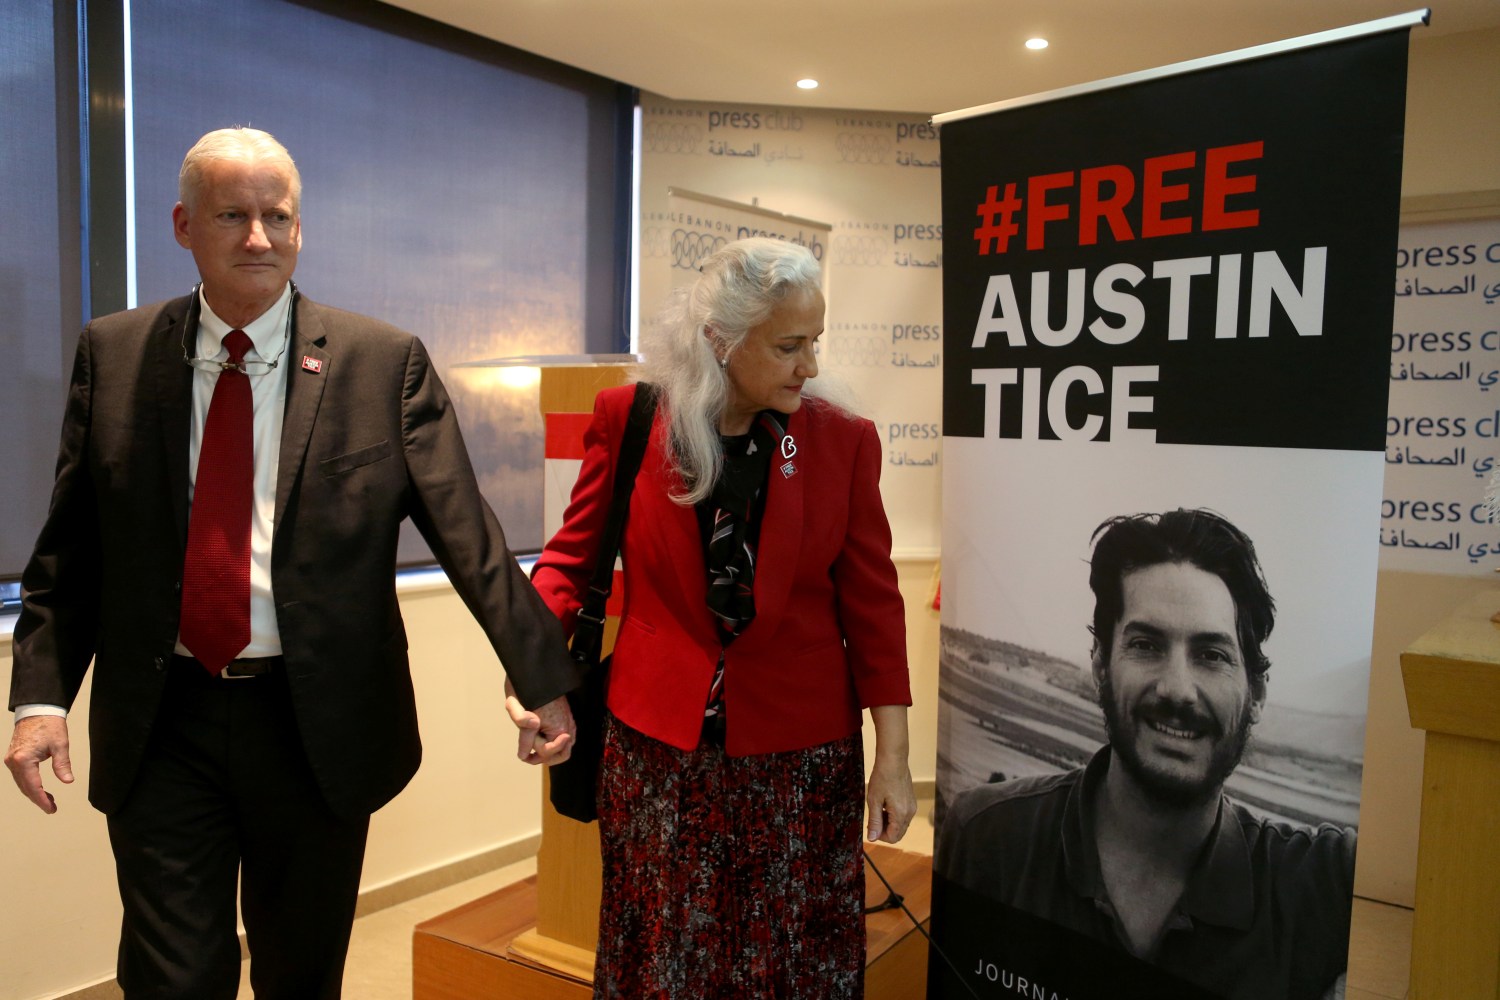 Marc and Debra Tice, parents of U.S. journalist Austin Tice, walk past a poster of their son after the news conference in Beirut, Lebanon December 4, 2018. REUTERS/Mohamed Azakir